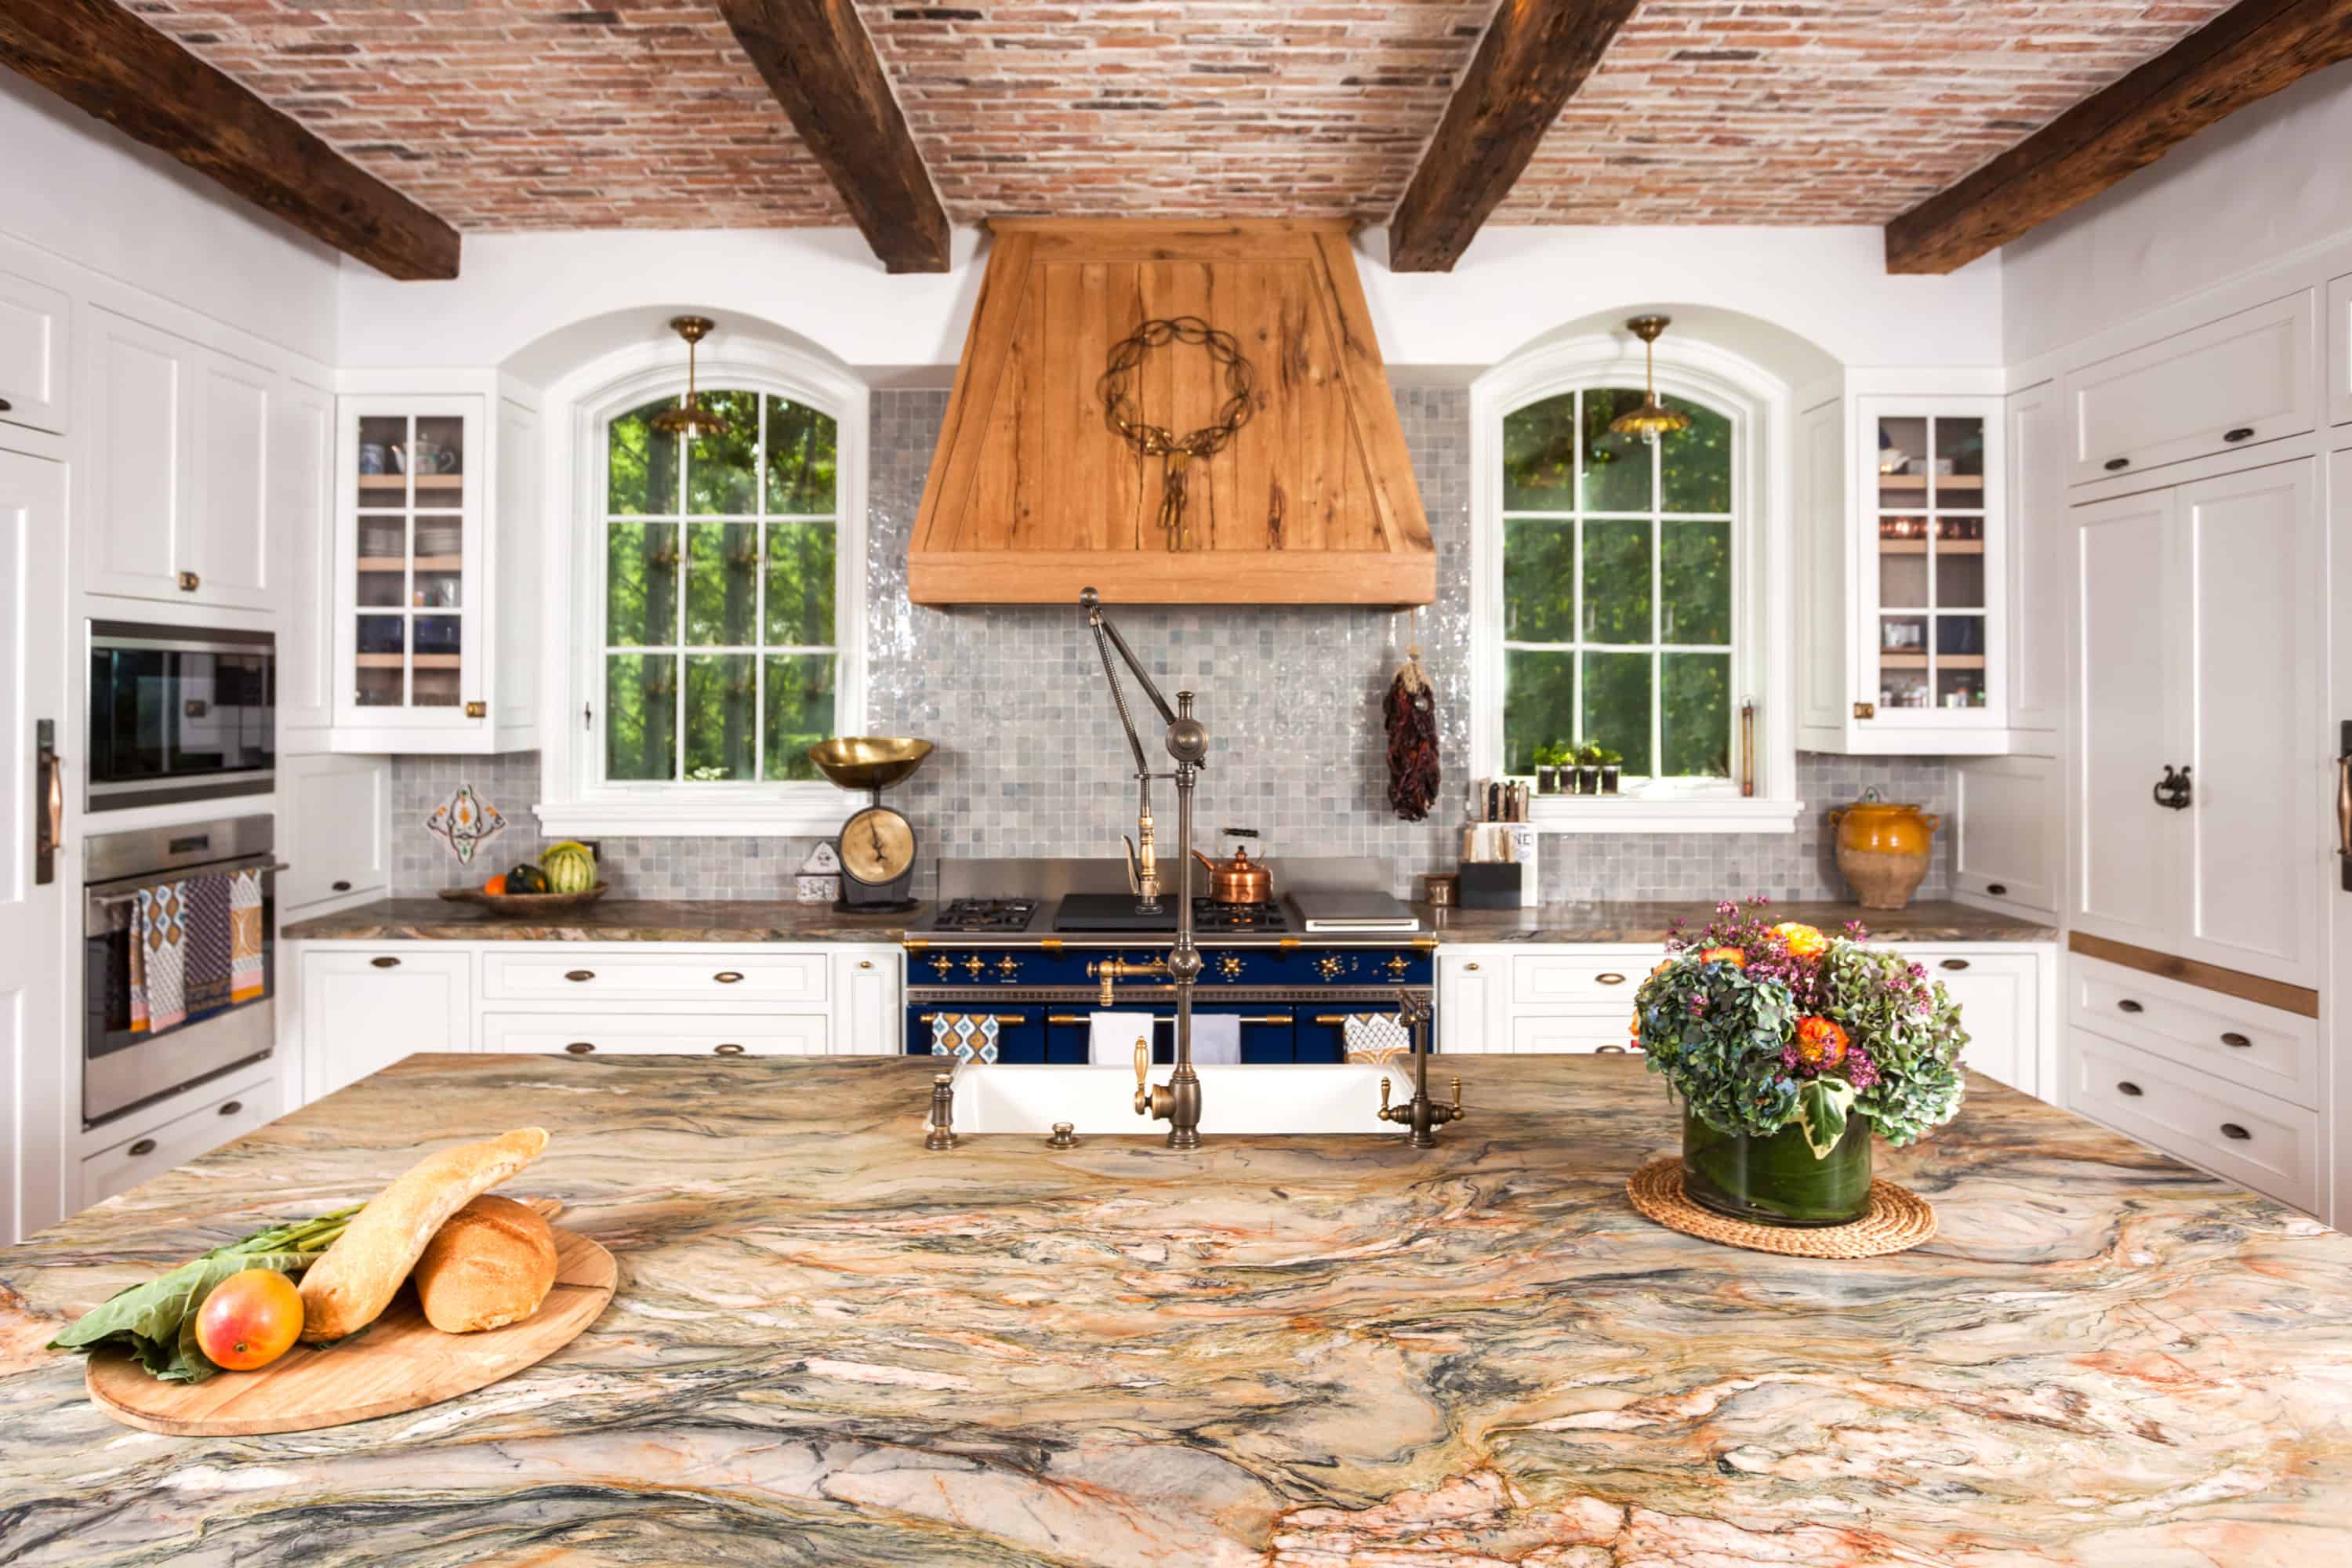 Stunning kitchen uses natural stone everywhere and we love it